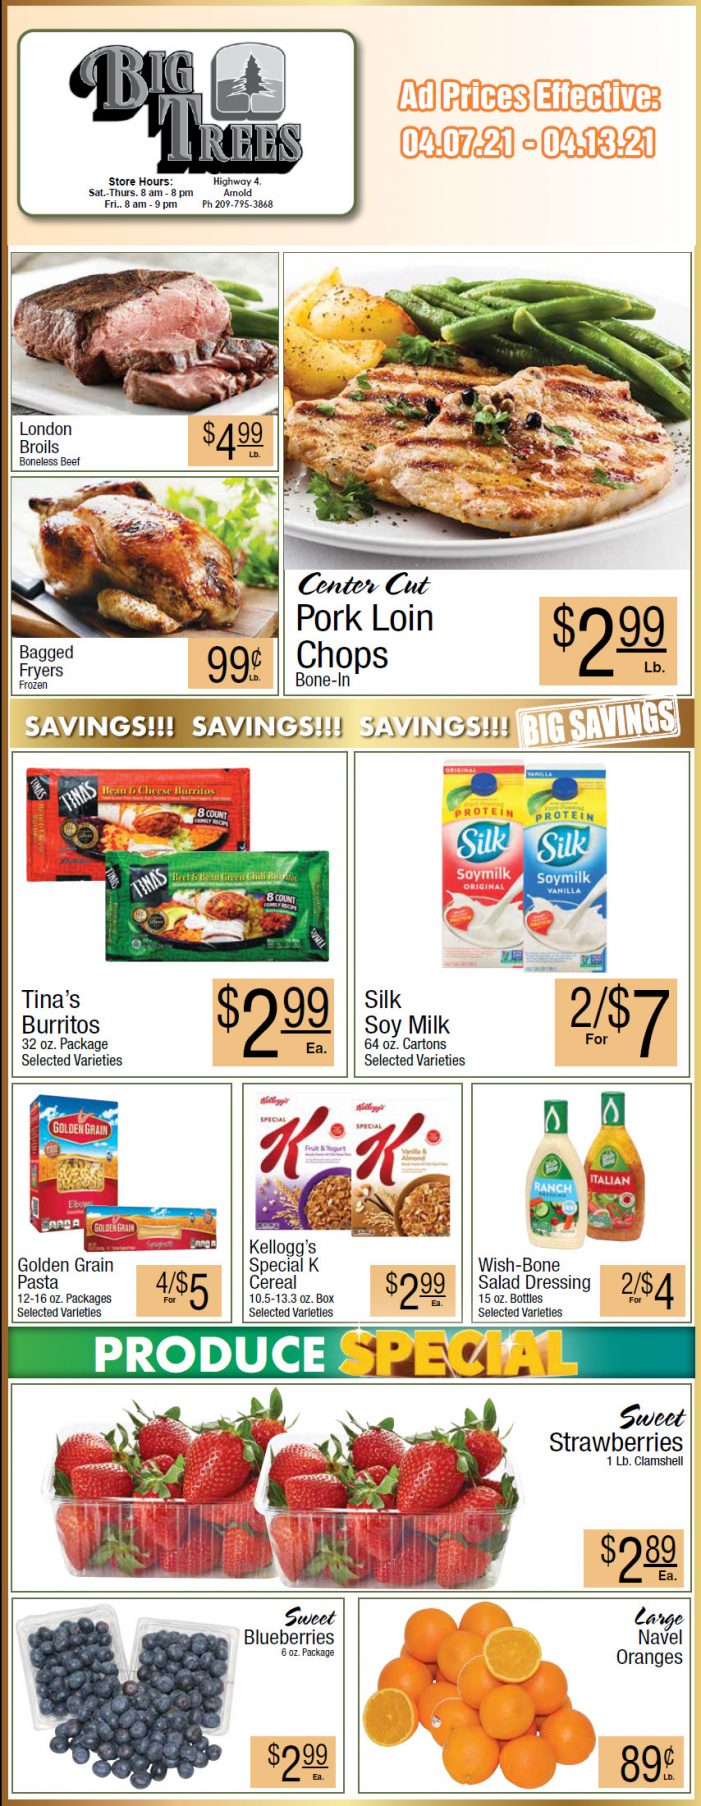 Big Trees Market Weekly Ad & Grocery Specials Through April 13th!  Shop Local & Save!!